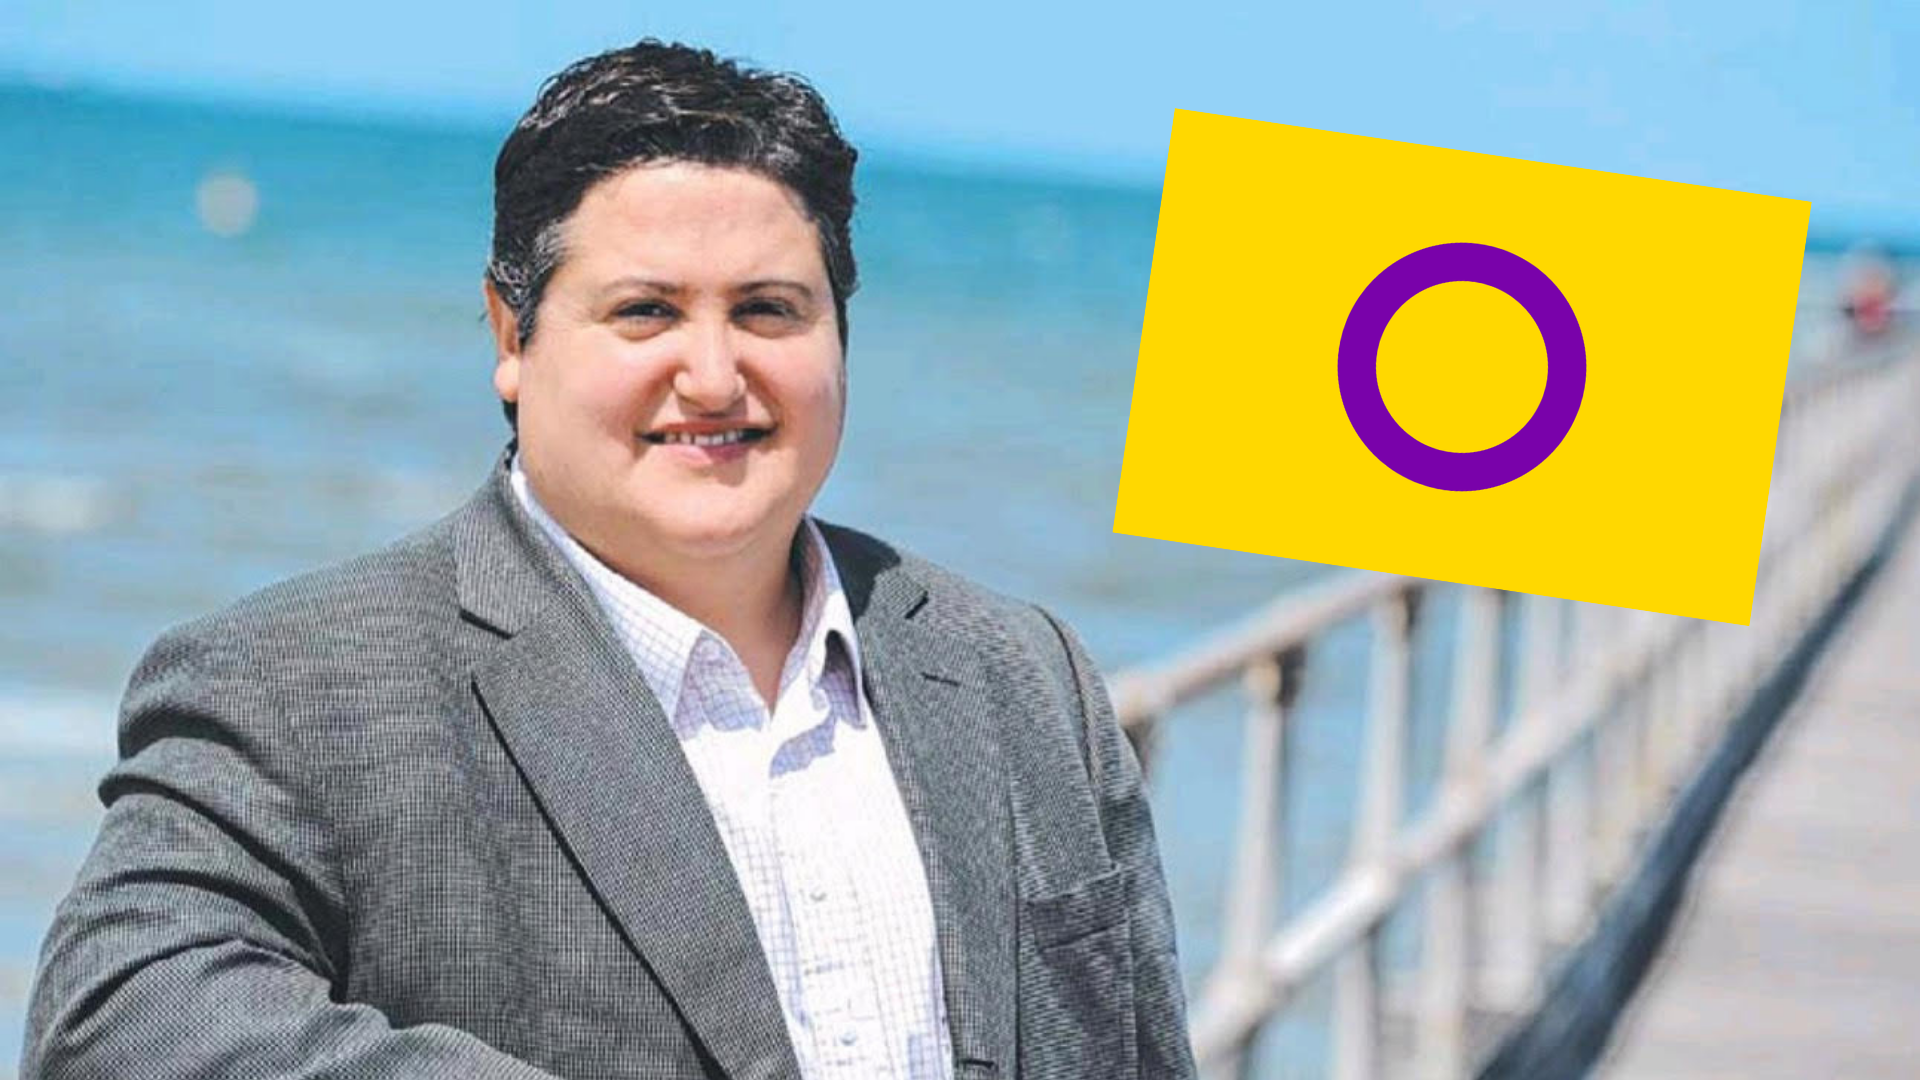 Intersex advocate to boycott Pride March if Royal Children’s Hospital is involved